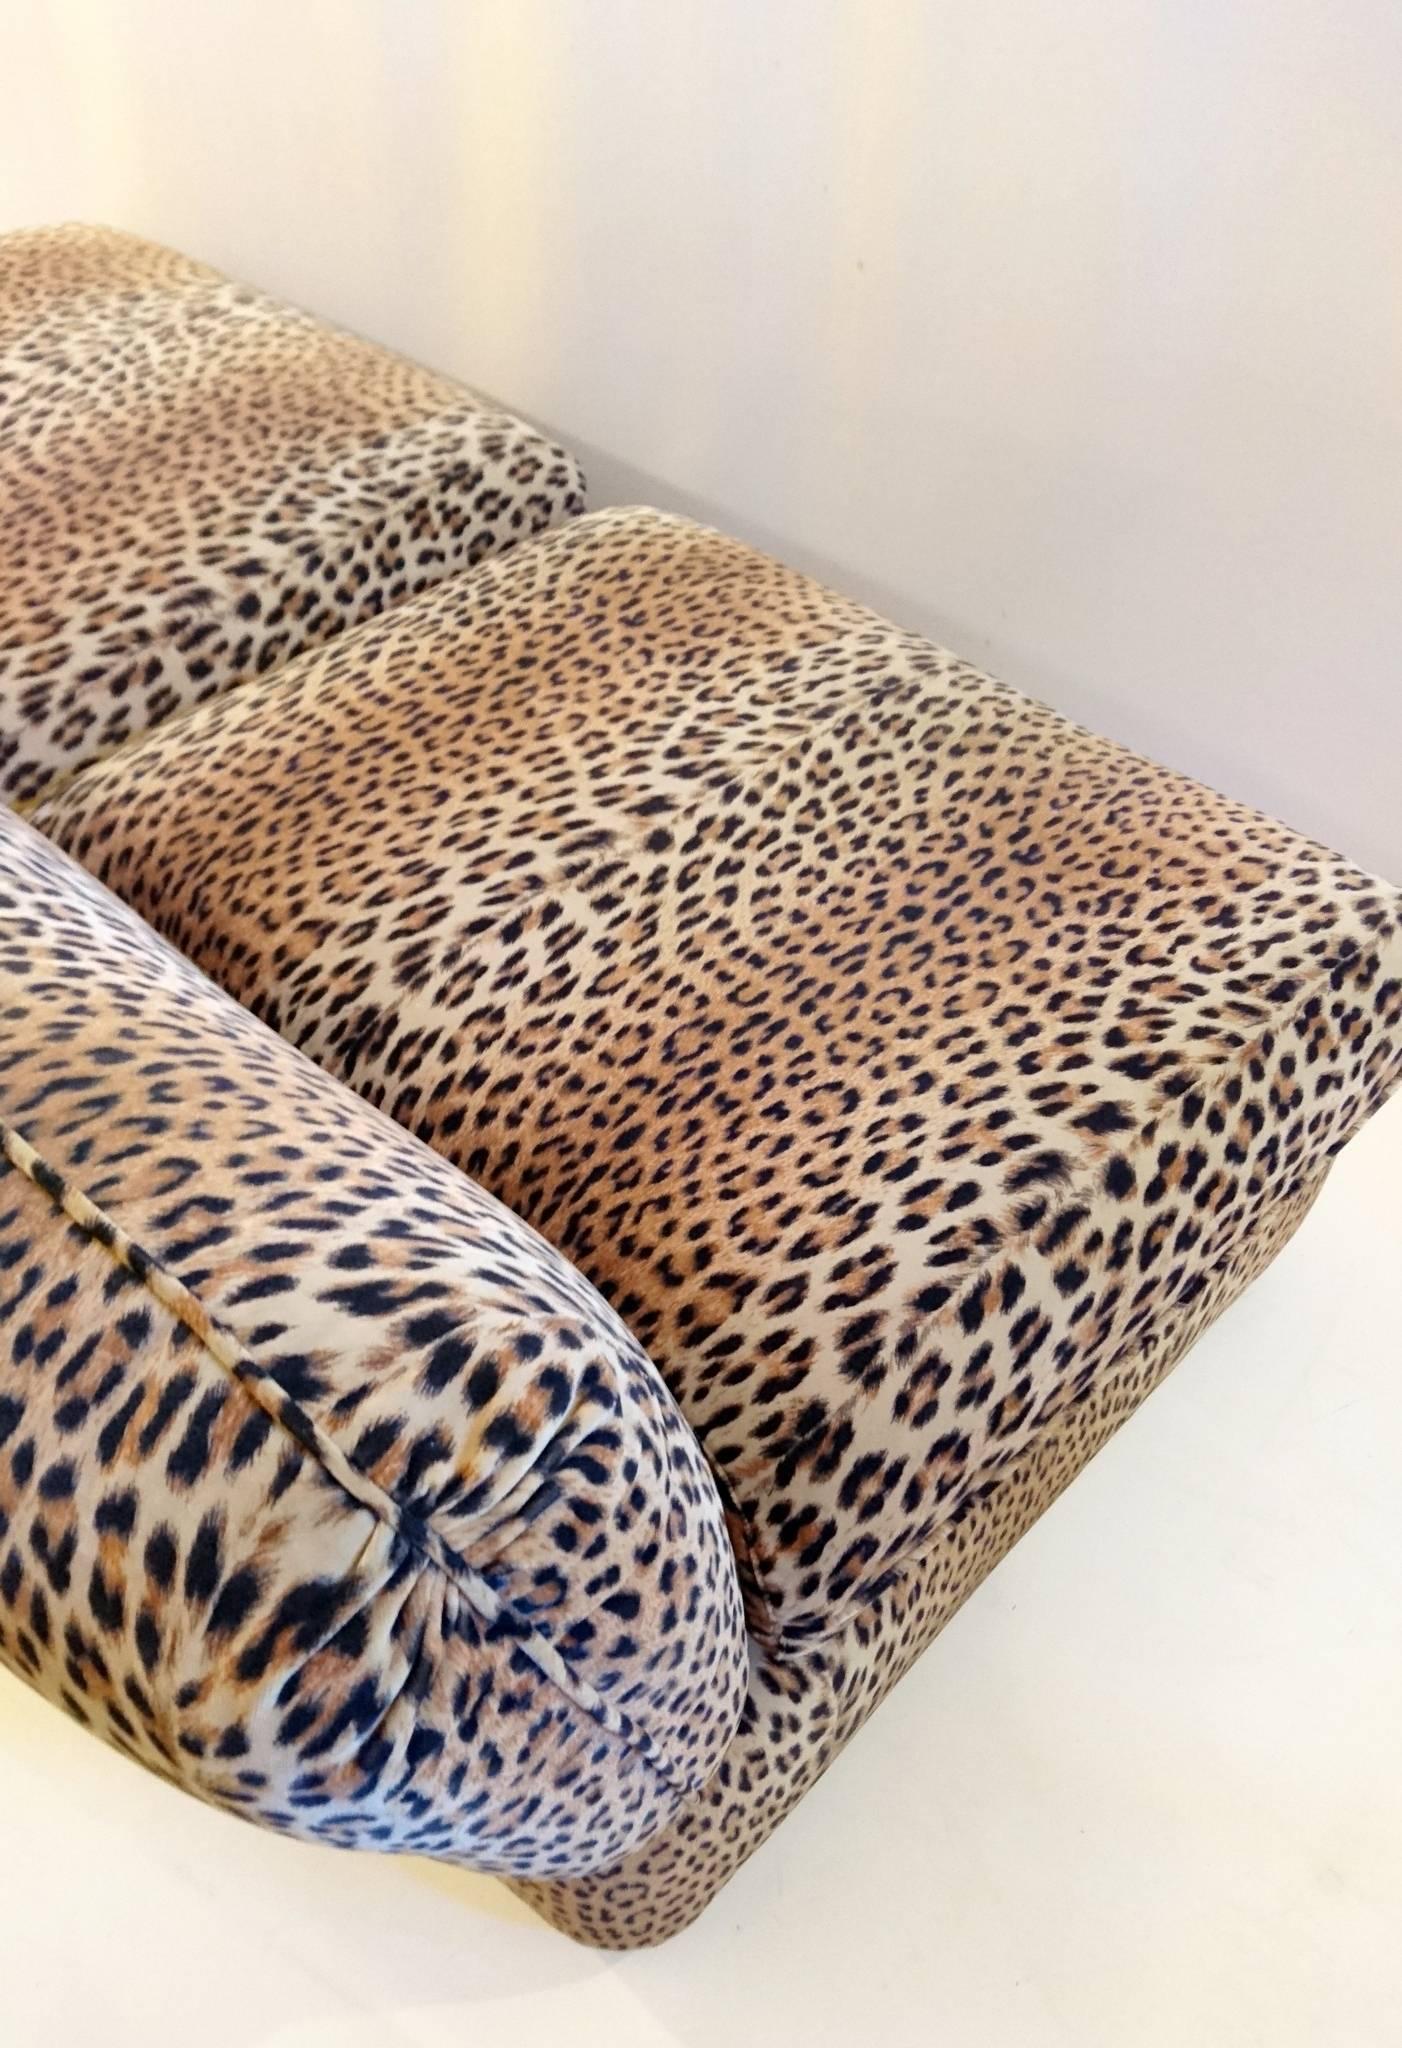 Hollywood Regency Vintage Sofa in Leopard Velvet by Cyrus Company Italy